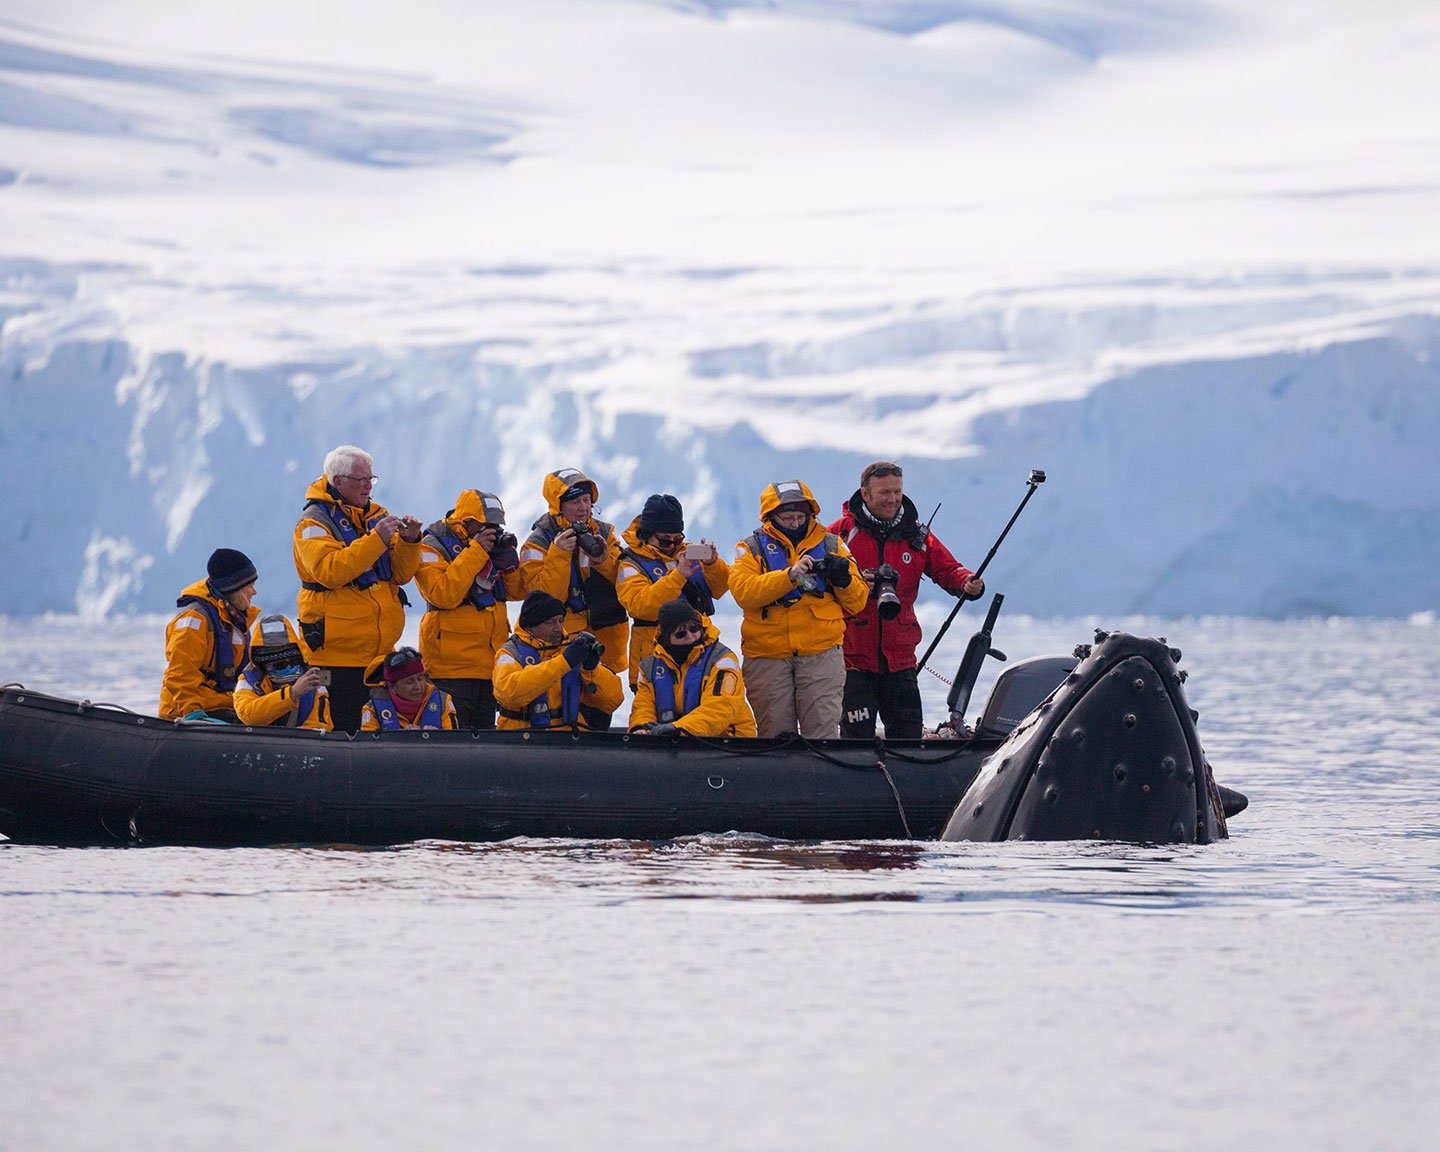 Quark Expeditions guests receive a visit from a curious humpback whale during a Zodiac outing.